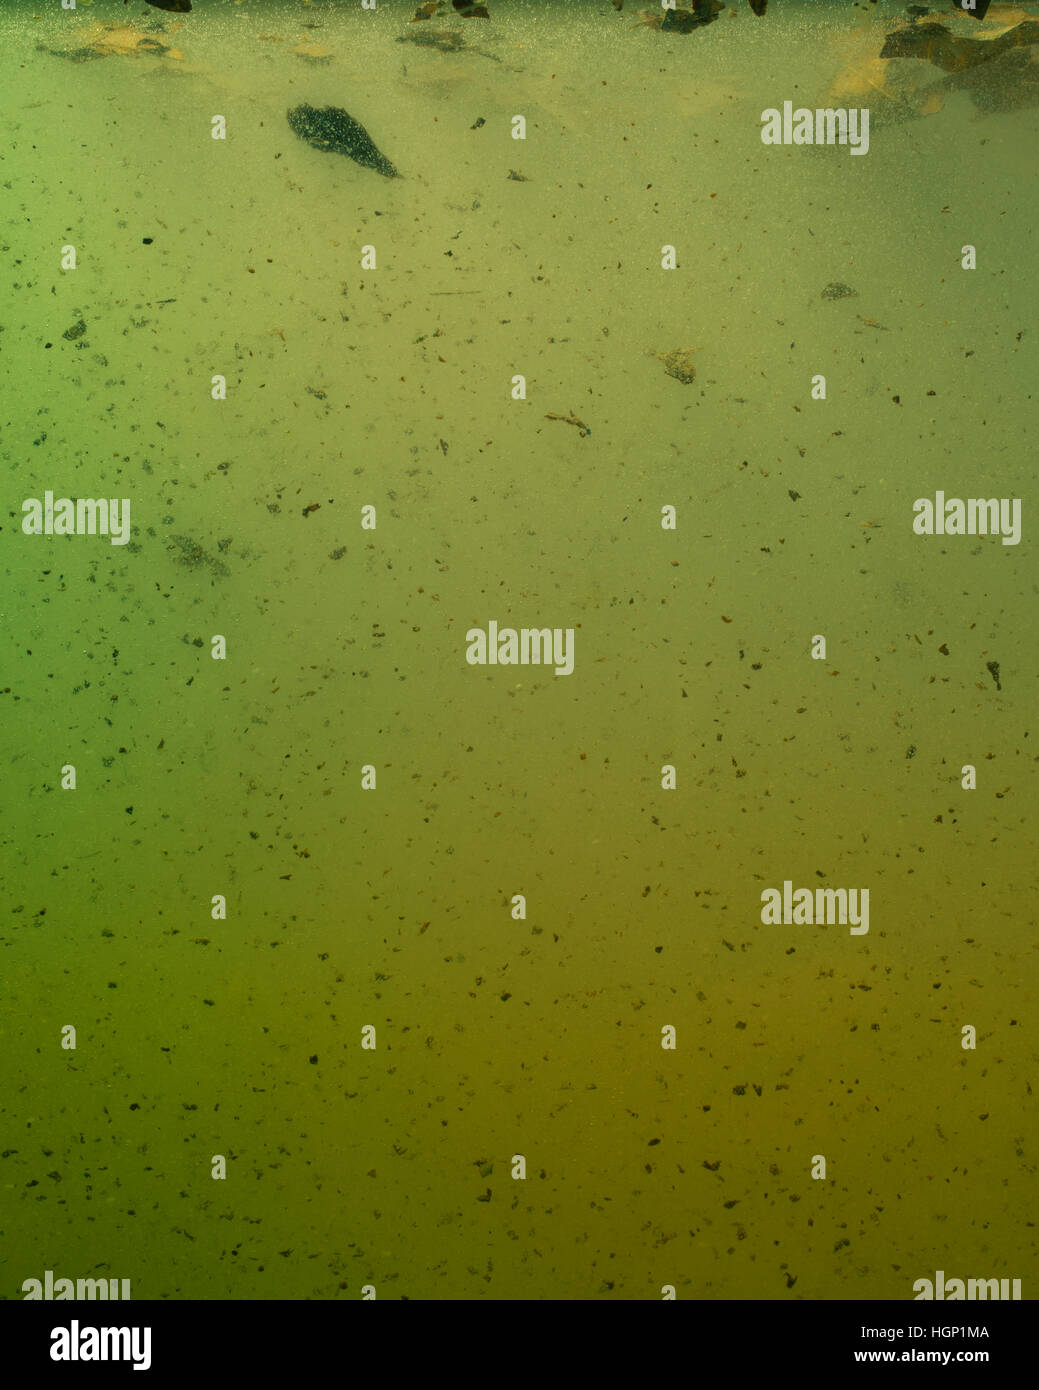 Swamp background  floating debris in the green debris of a swampy body of water. Stock Photo